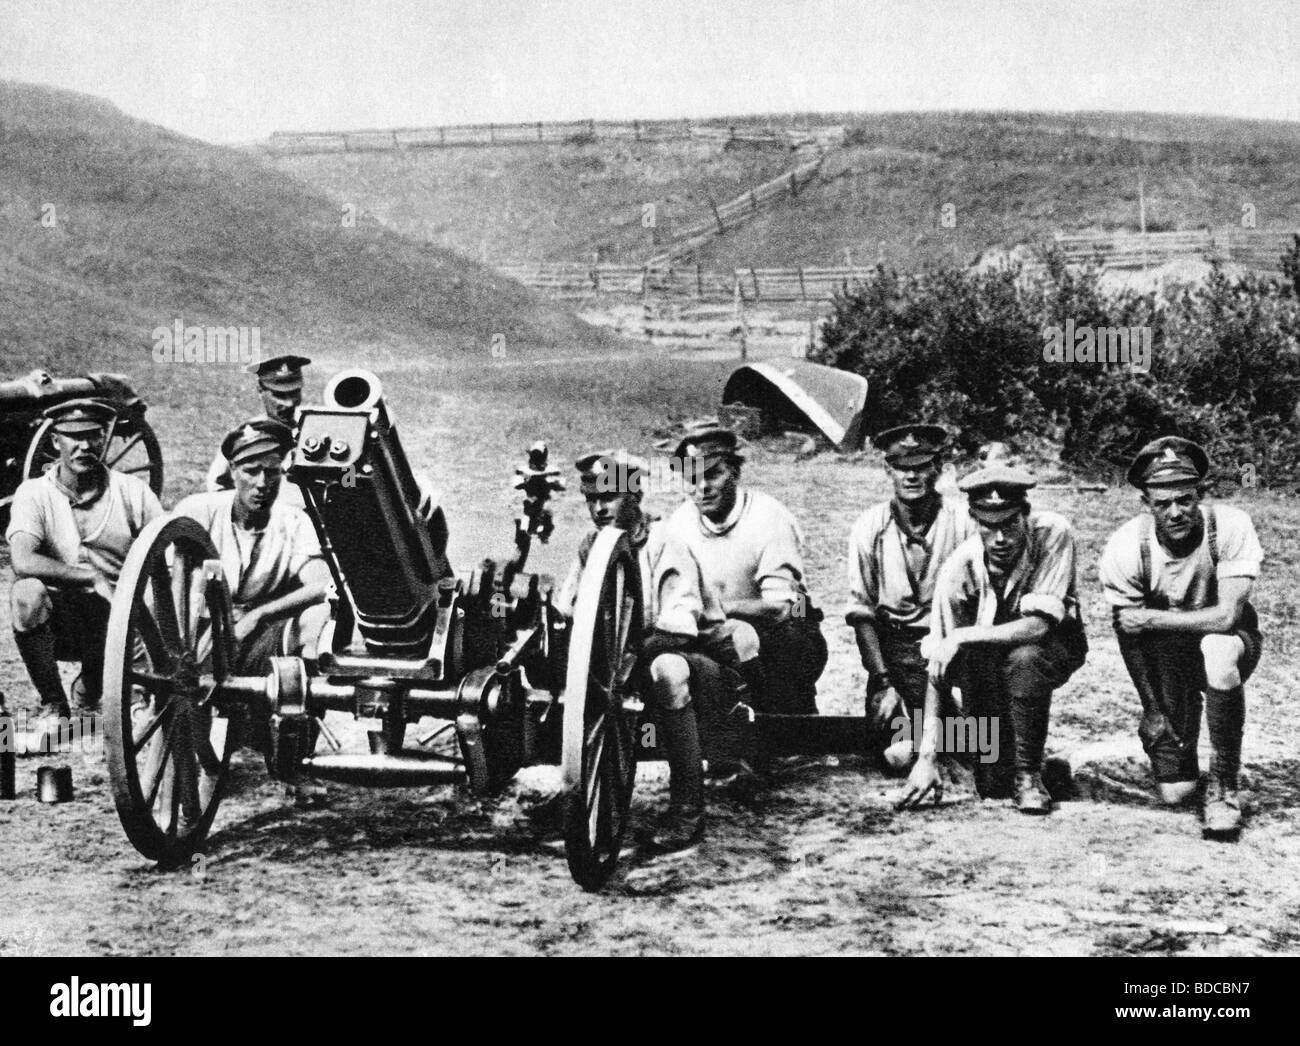 geography / travel, Russia, Civil War 1917 - 1920, intervention of the Entente powers, British gunners, 1918, military, field gun, artillery, Great Britain, soldiers, historic, historical, 20th century, 1910s, people, Stock Photo